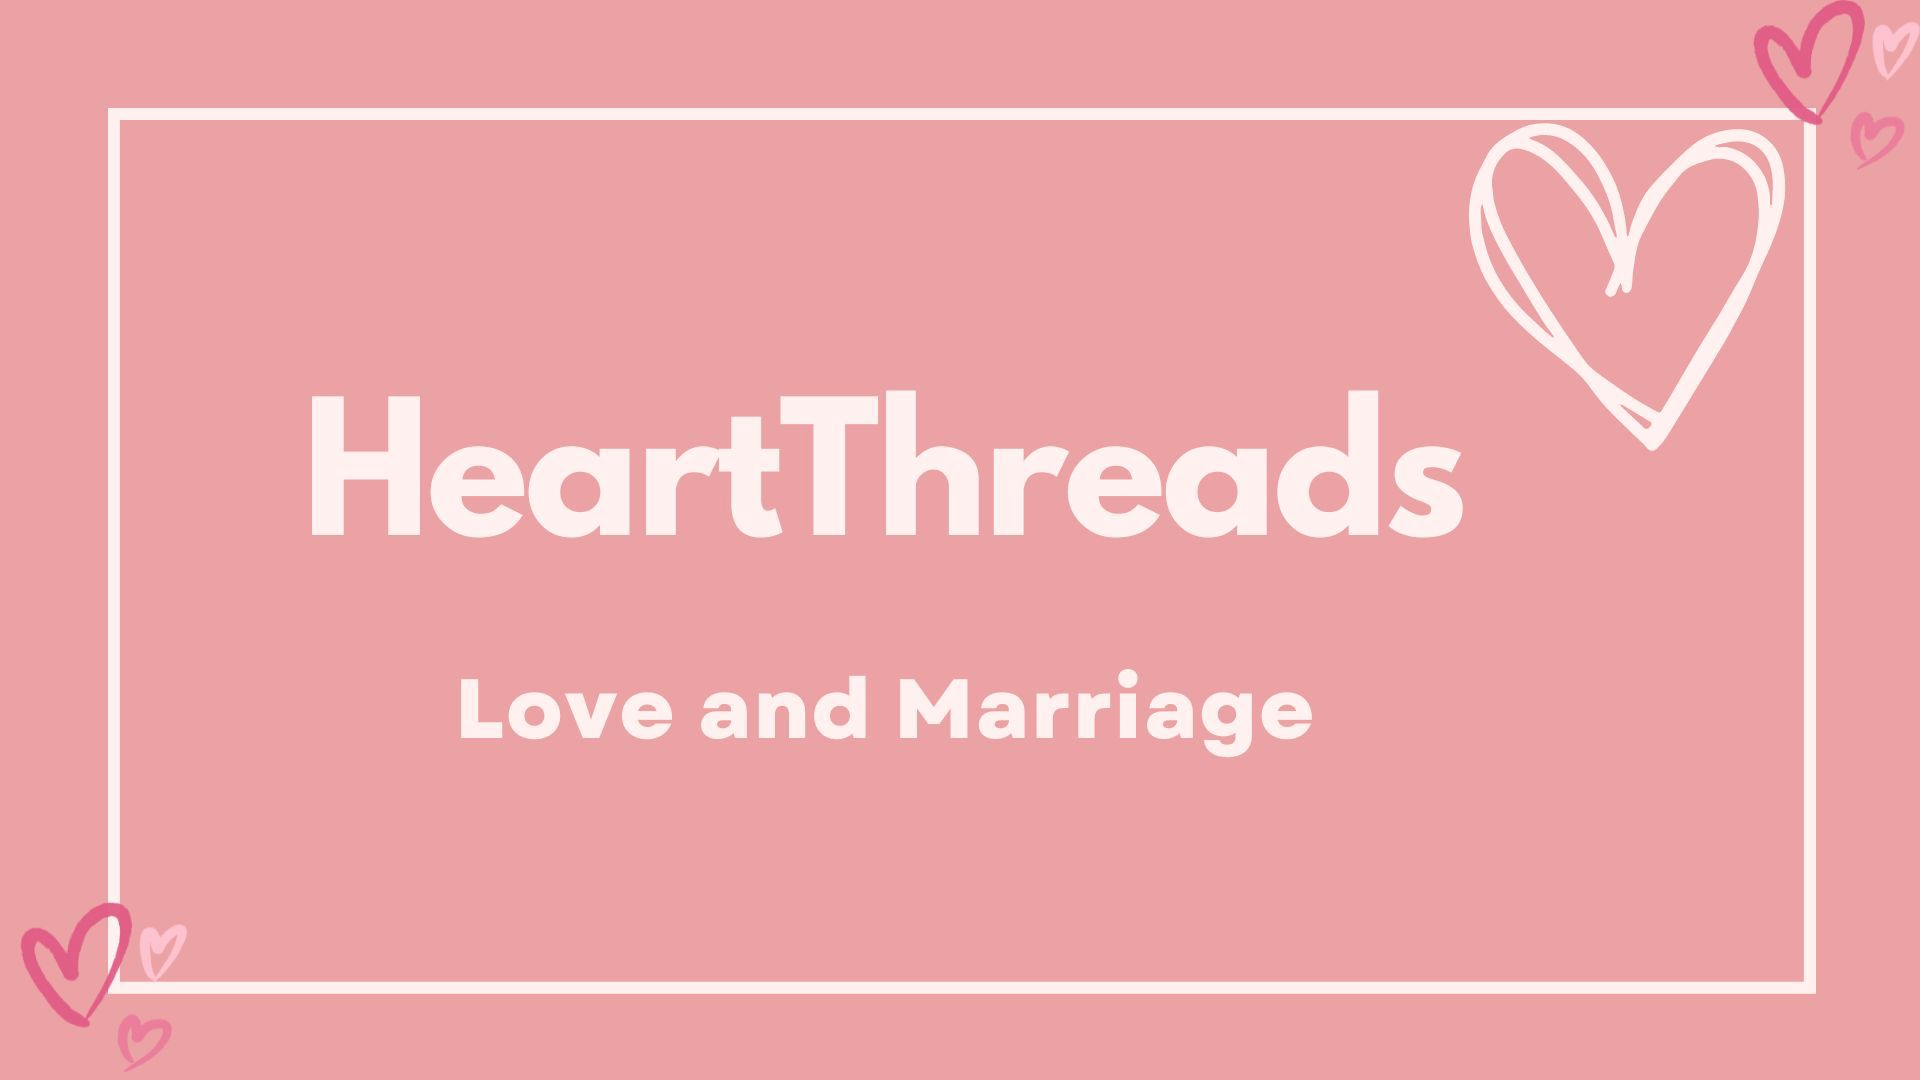 This edition of HeartThreads is full of stories of love, commitment and marriage. From couples celebrating 70 years to newlyweds, we share their love stories.